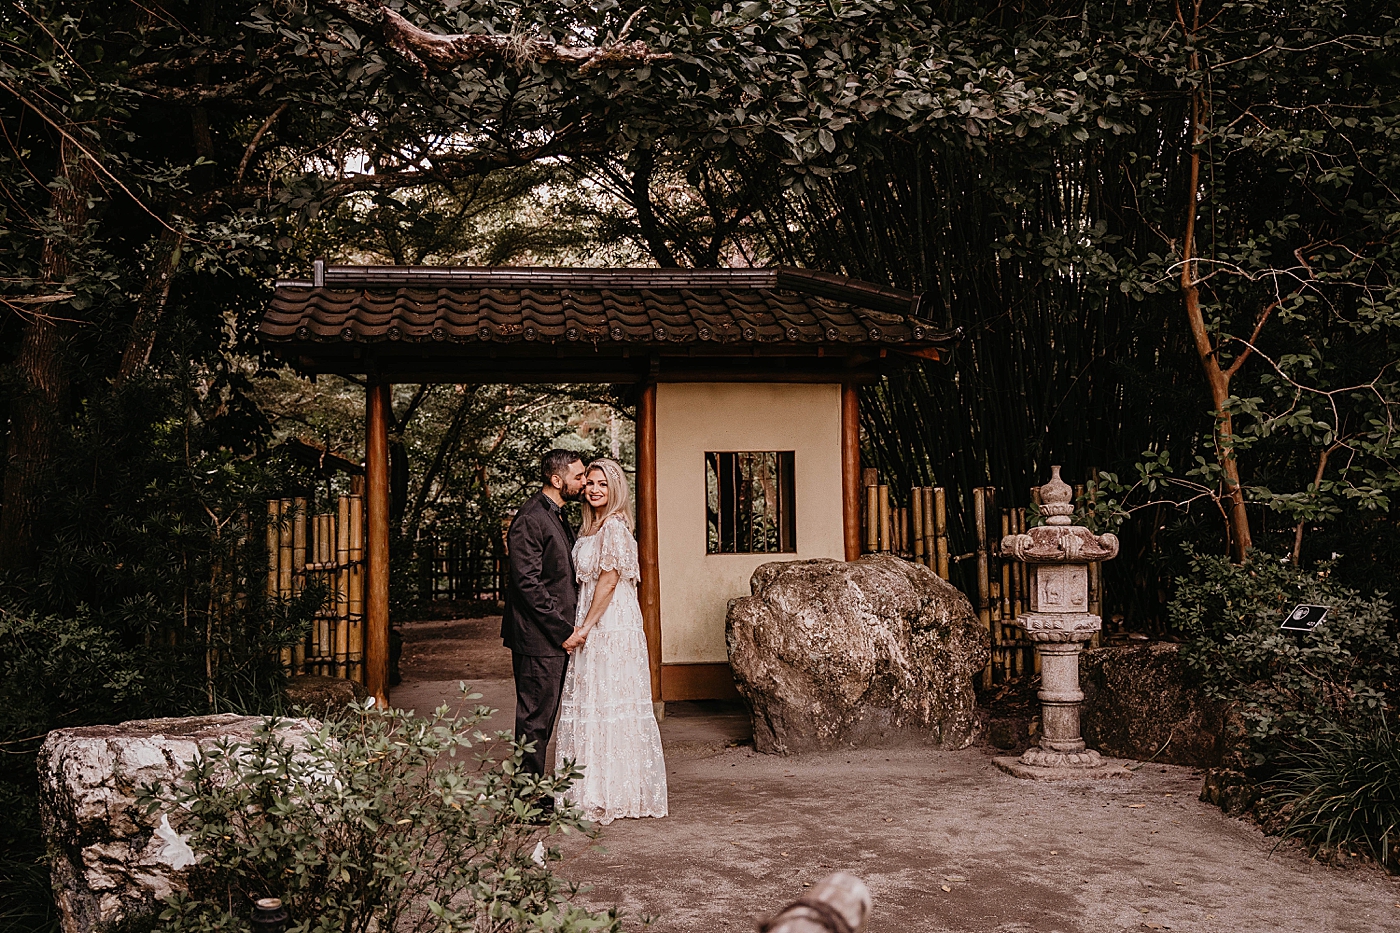 Couple close to each other posing in front of Japanese Garden Scenery Morikami Museum and Japanese Gardens Engagement Photography captured by Krystal Capone Photography